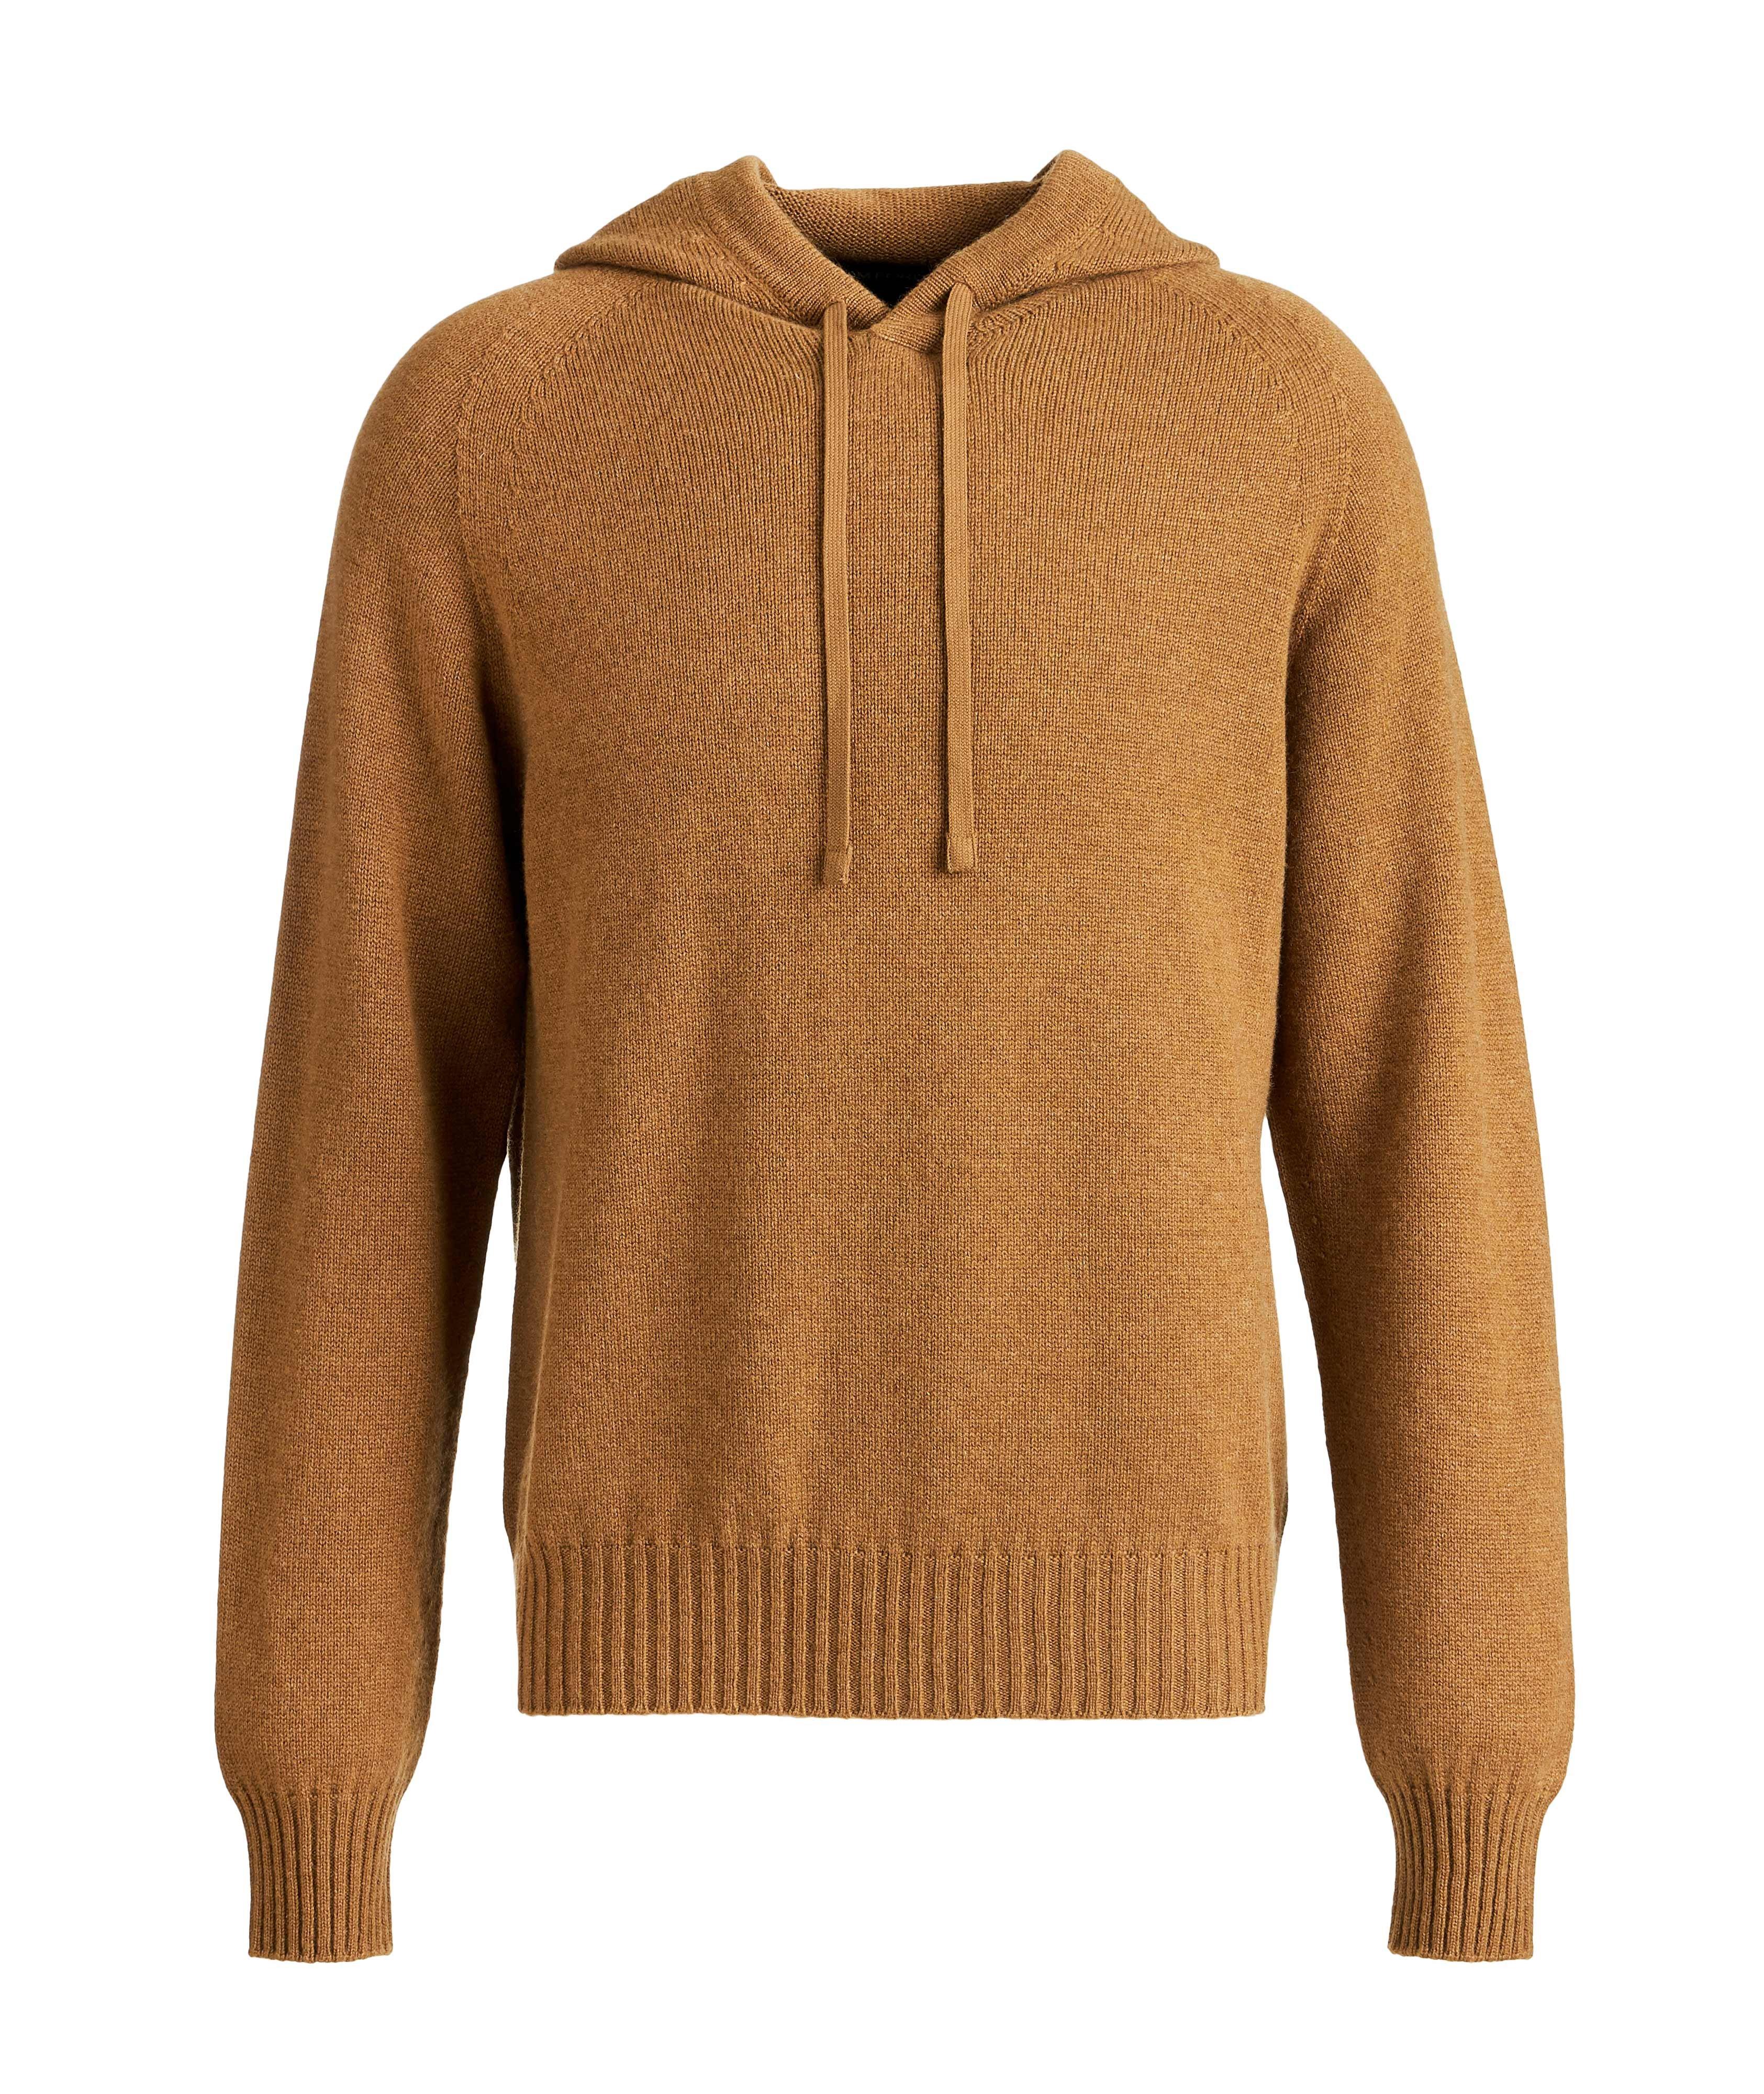 Knit Cashmere Hoodie image 0